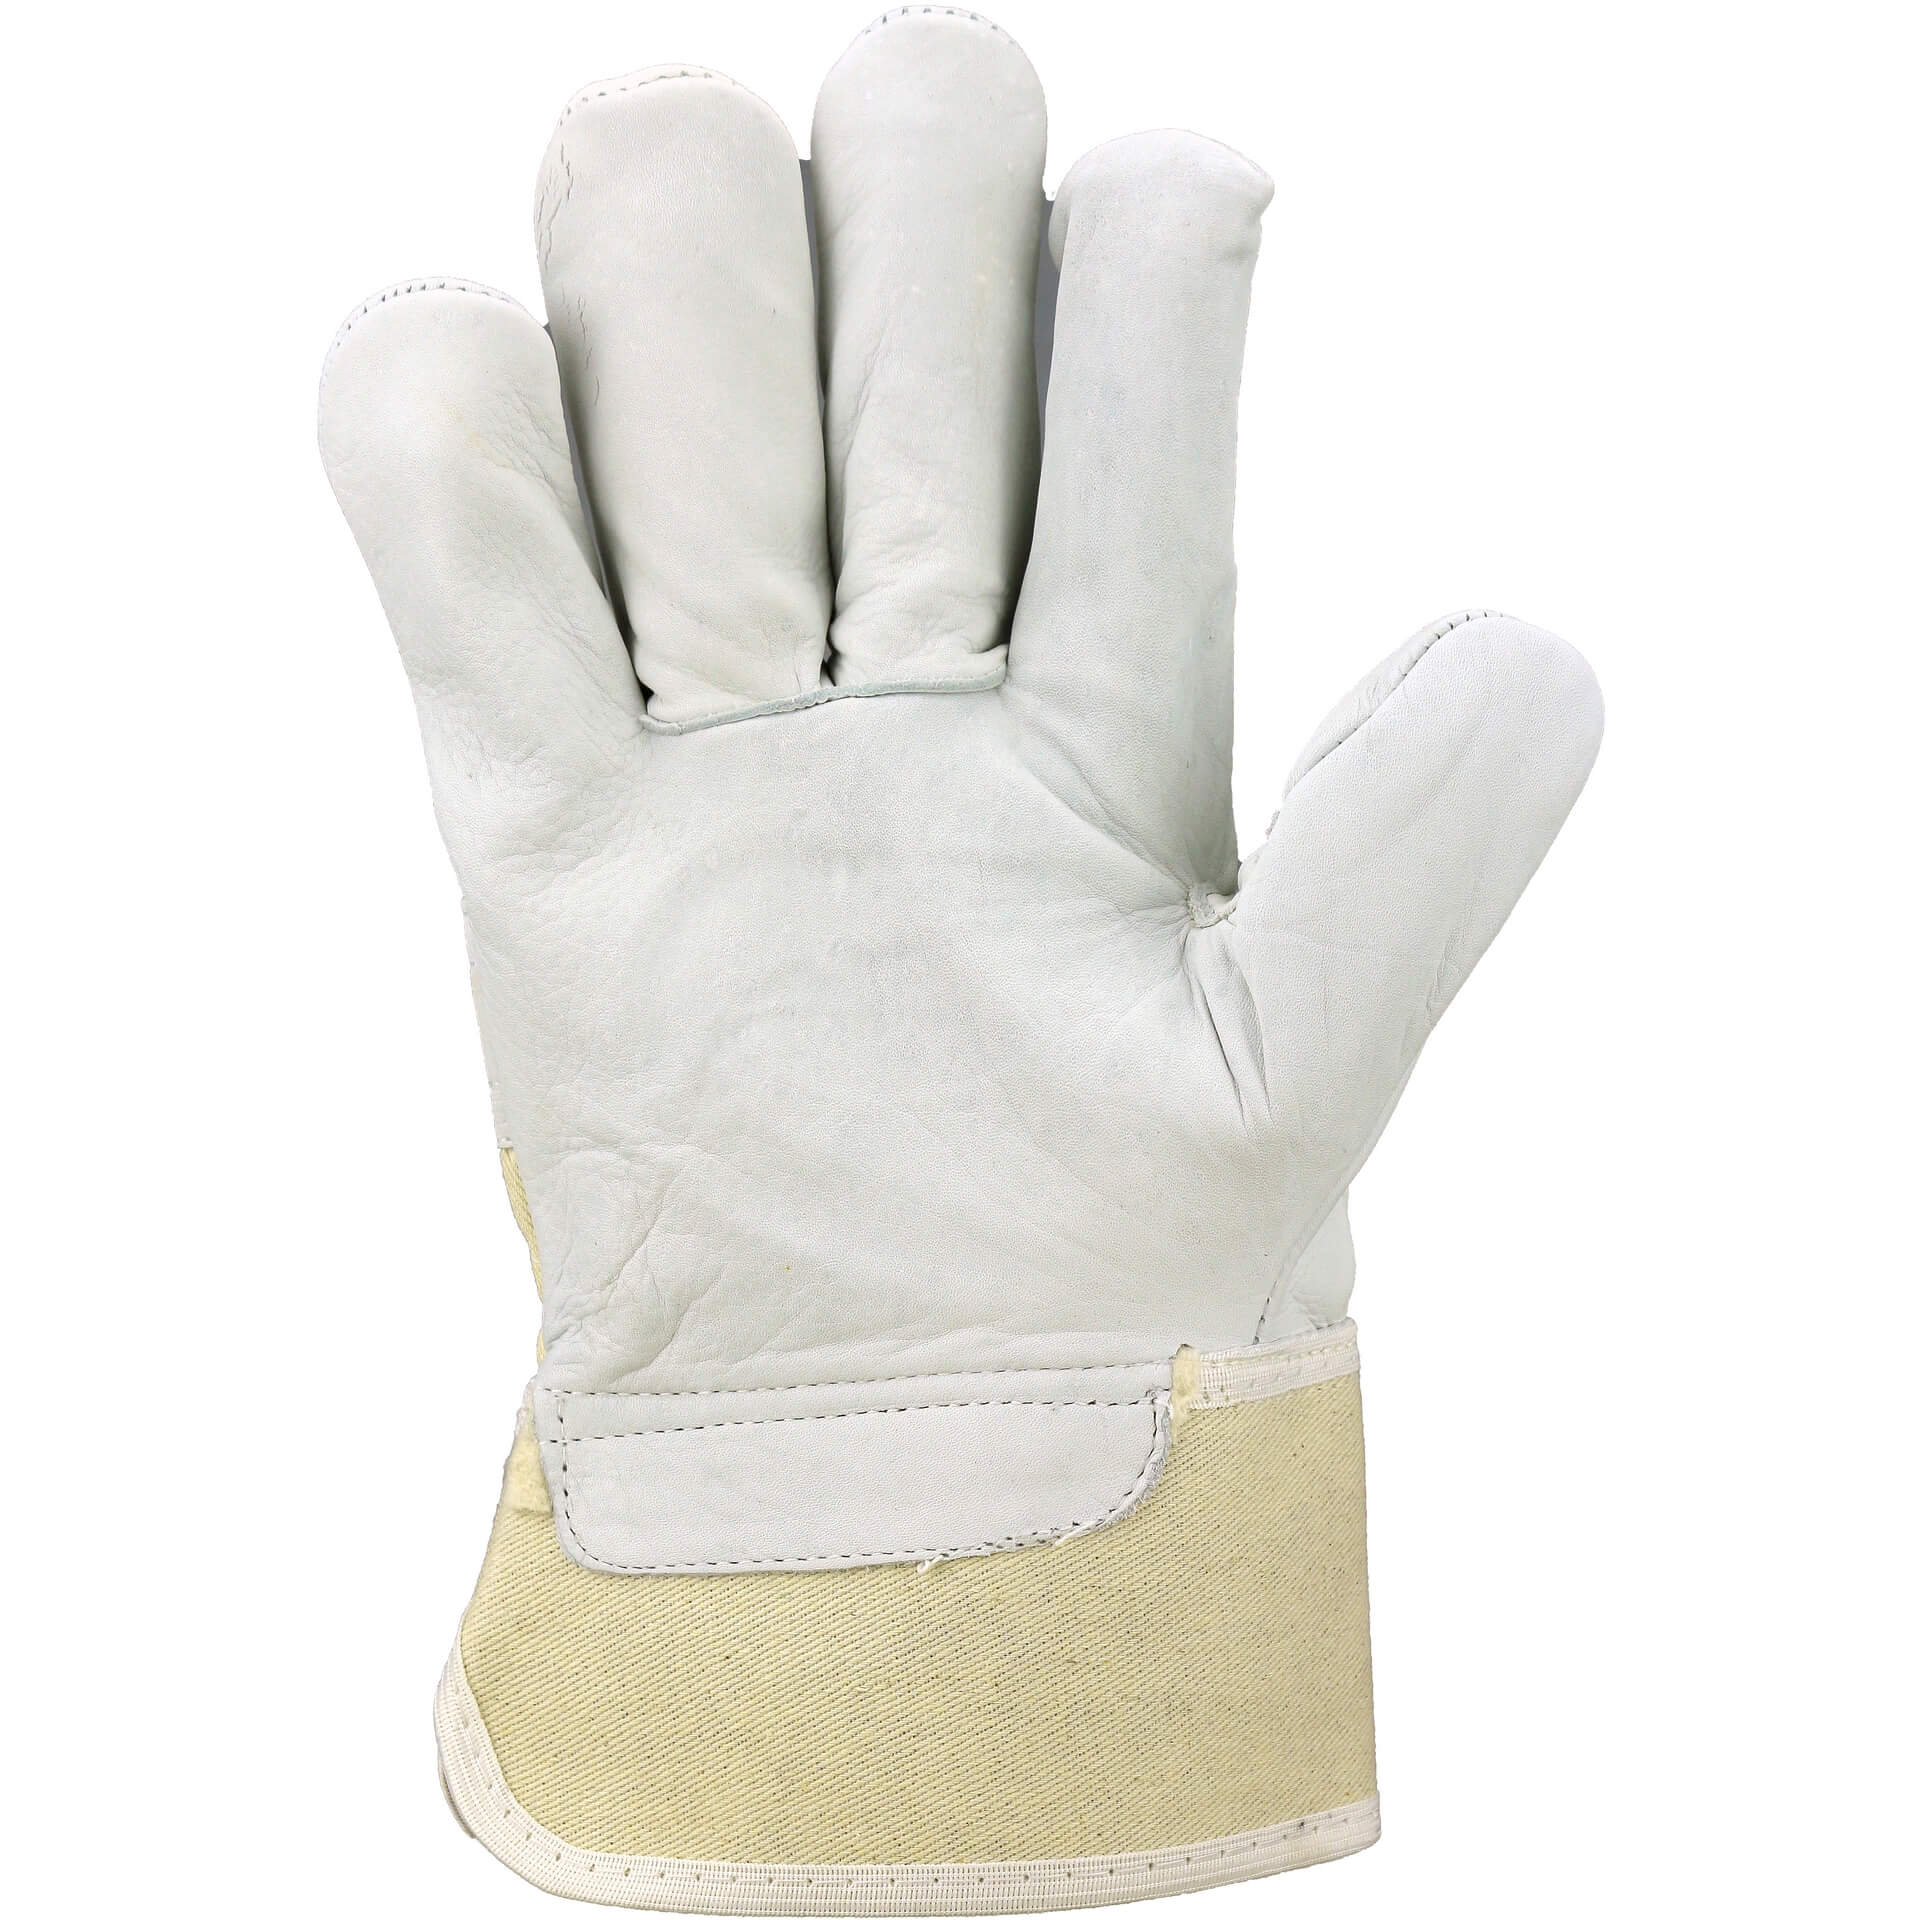 Product image Cow grain leather glove ADLER-C8